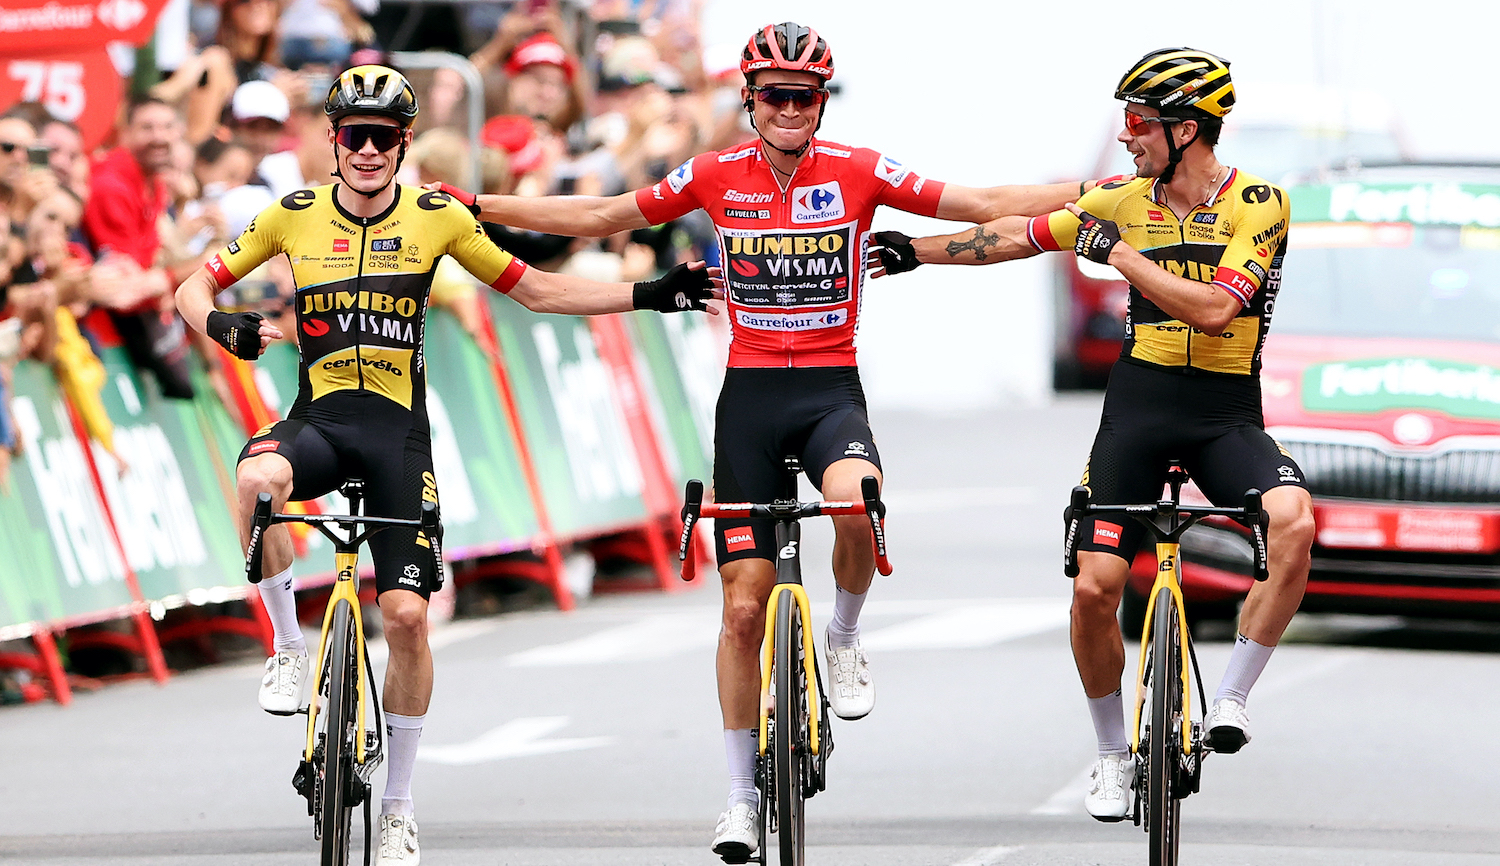 GUADARRAMA, SPAIN - SEPTEMBER 16: (EDITOR'S NOTE: Alternate crop) (L-R) Jonas Vingegaard of Denmark, Sepp Kuss of The United States - Red Leader Jersey final overall winner and Primoz Roglic of Slovenia and Team Jumbo-Visma cross the finish line during the 78th Tour of Spain 2023, Stage 20 a 207.8km stage from Manzanares El Real to Guadarrama / #UCIWT / on September 16, 2023 in Guadarrama, Spain. (Photo by Alexander Hassenstein/Getty Images)